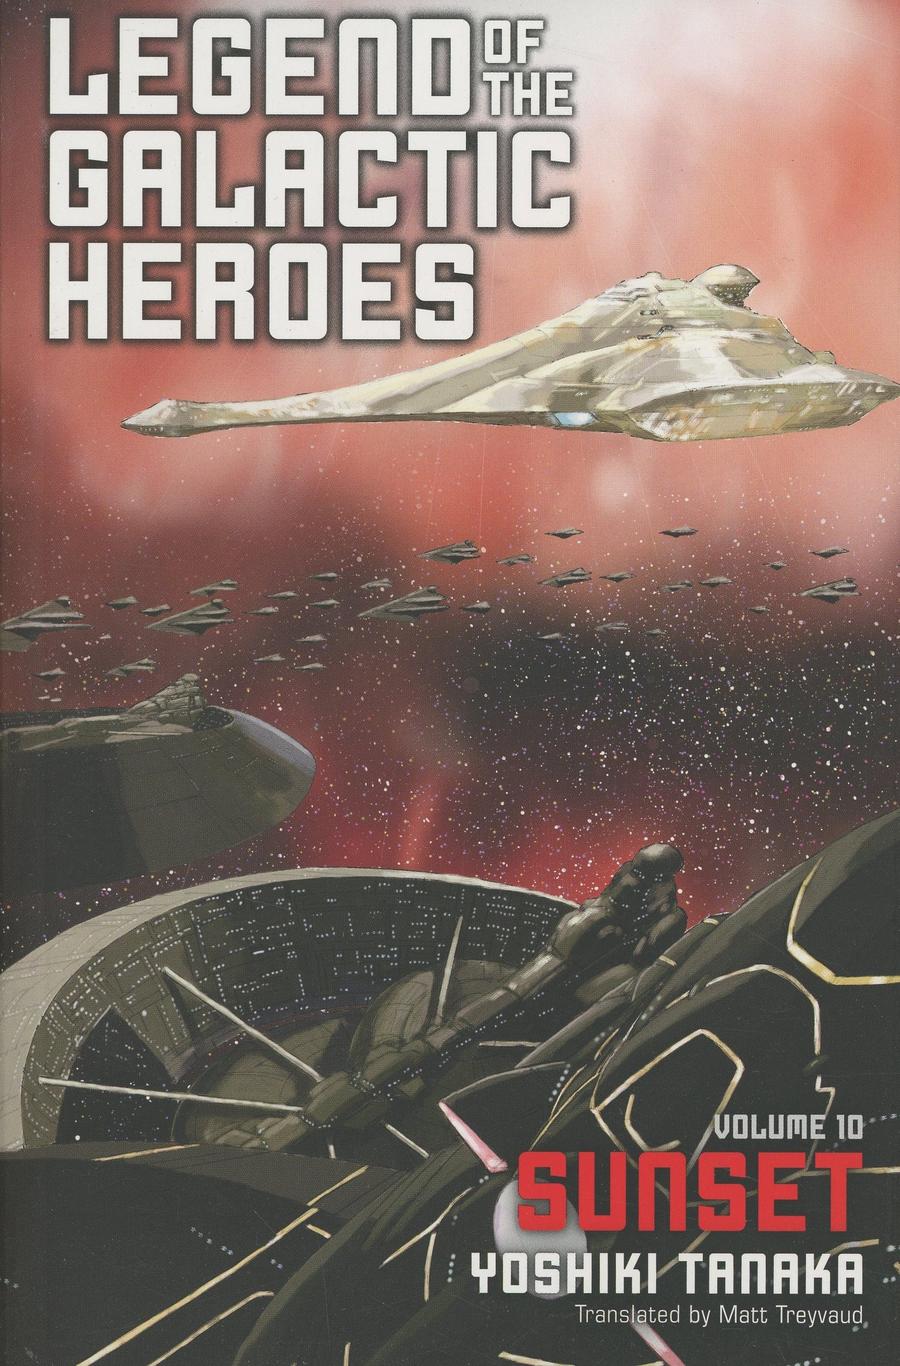 Legend Of The Galactic Heroes Vol 10 Sunset TP